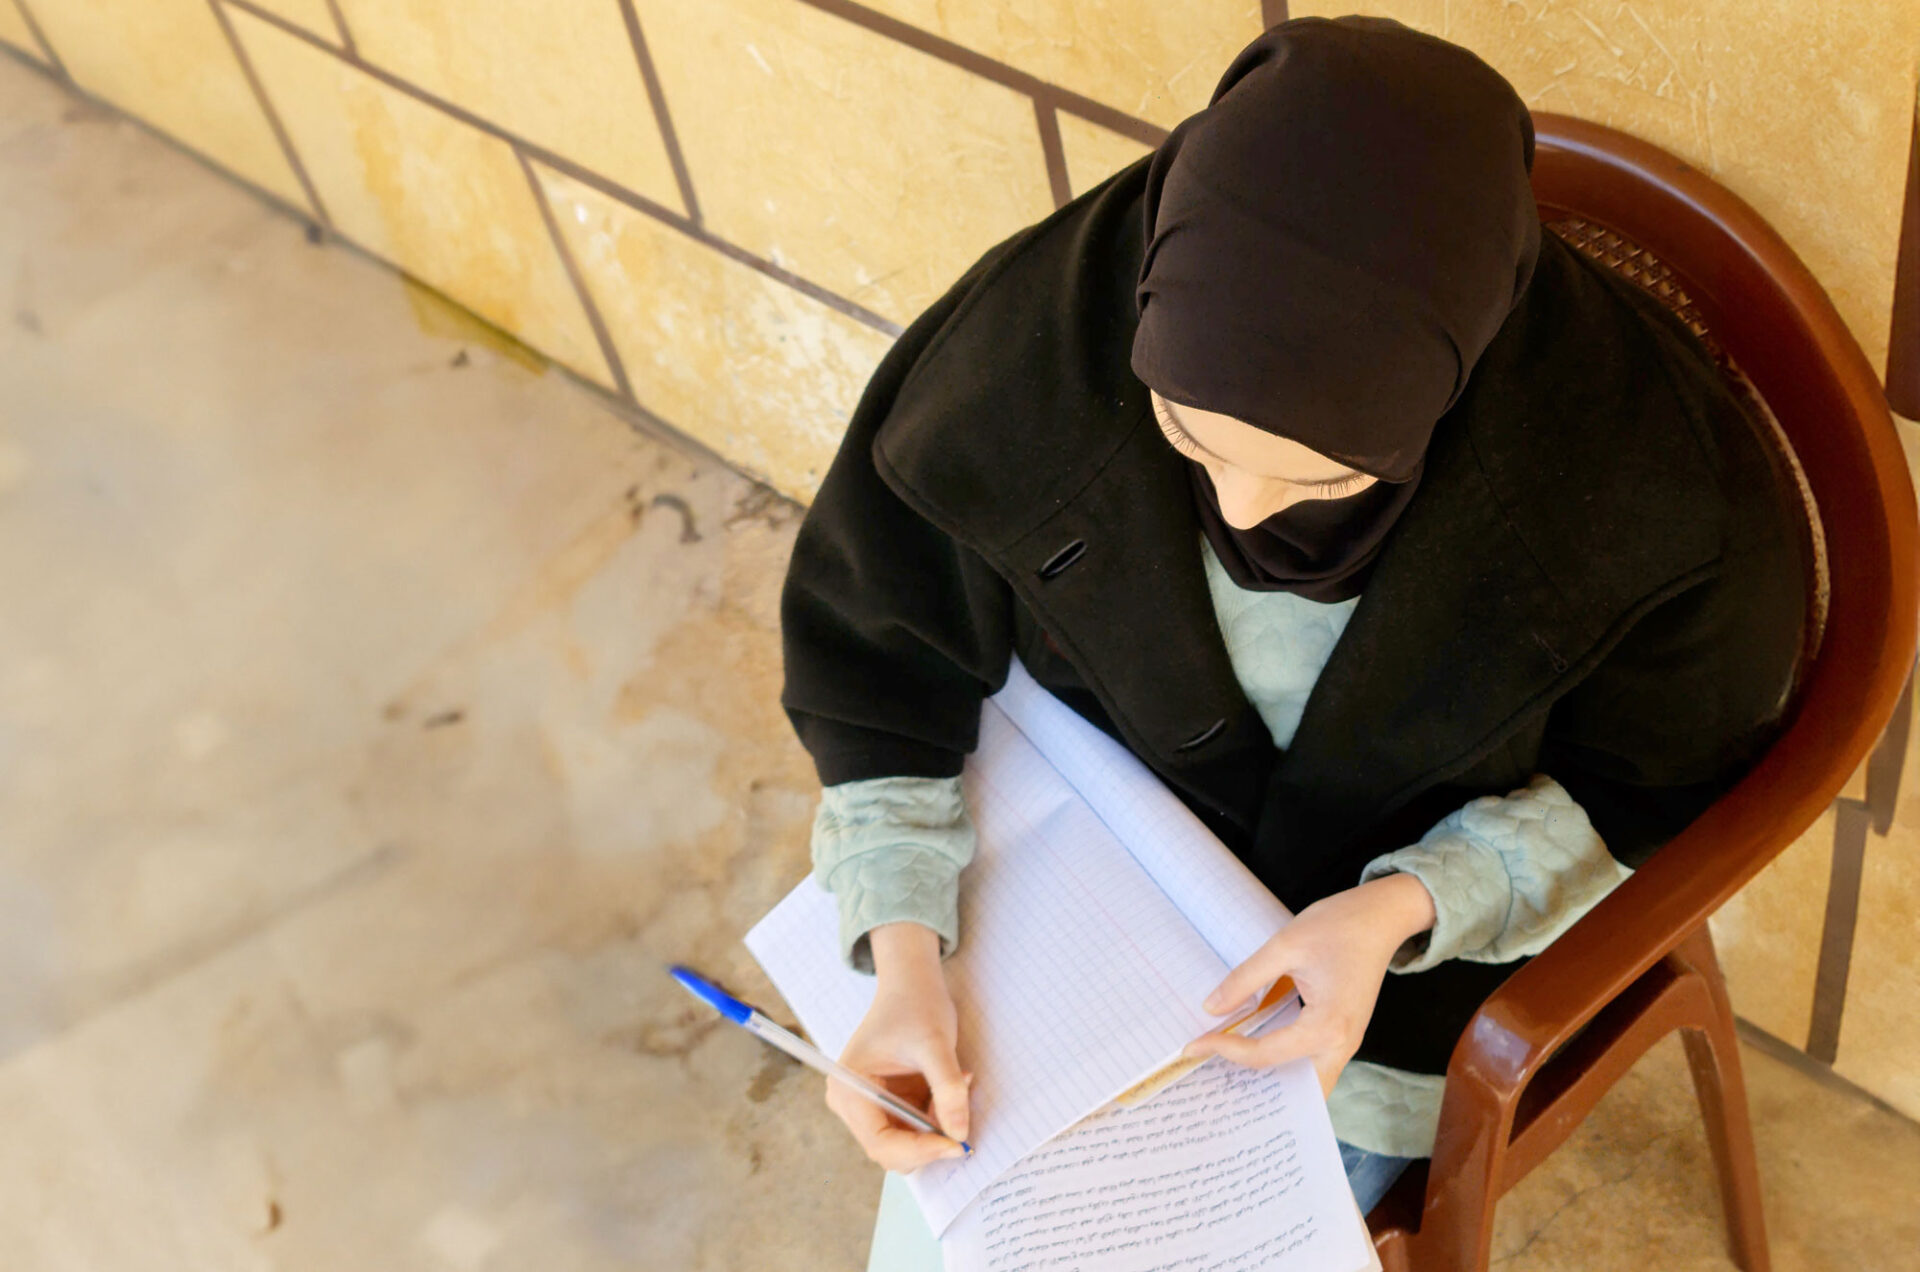 A girl wearing a hijab bends over a notebook.